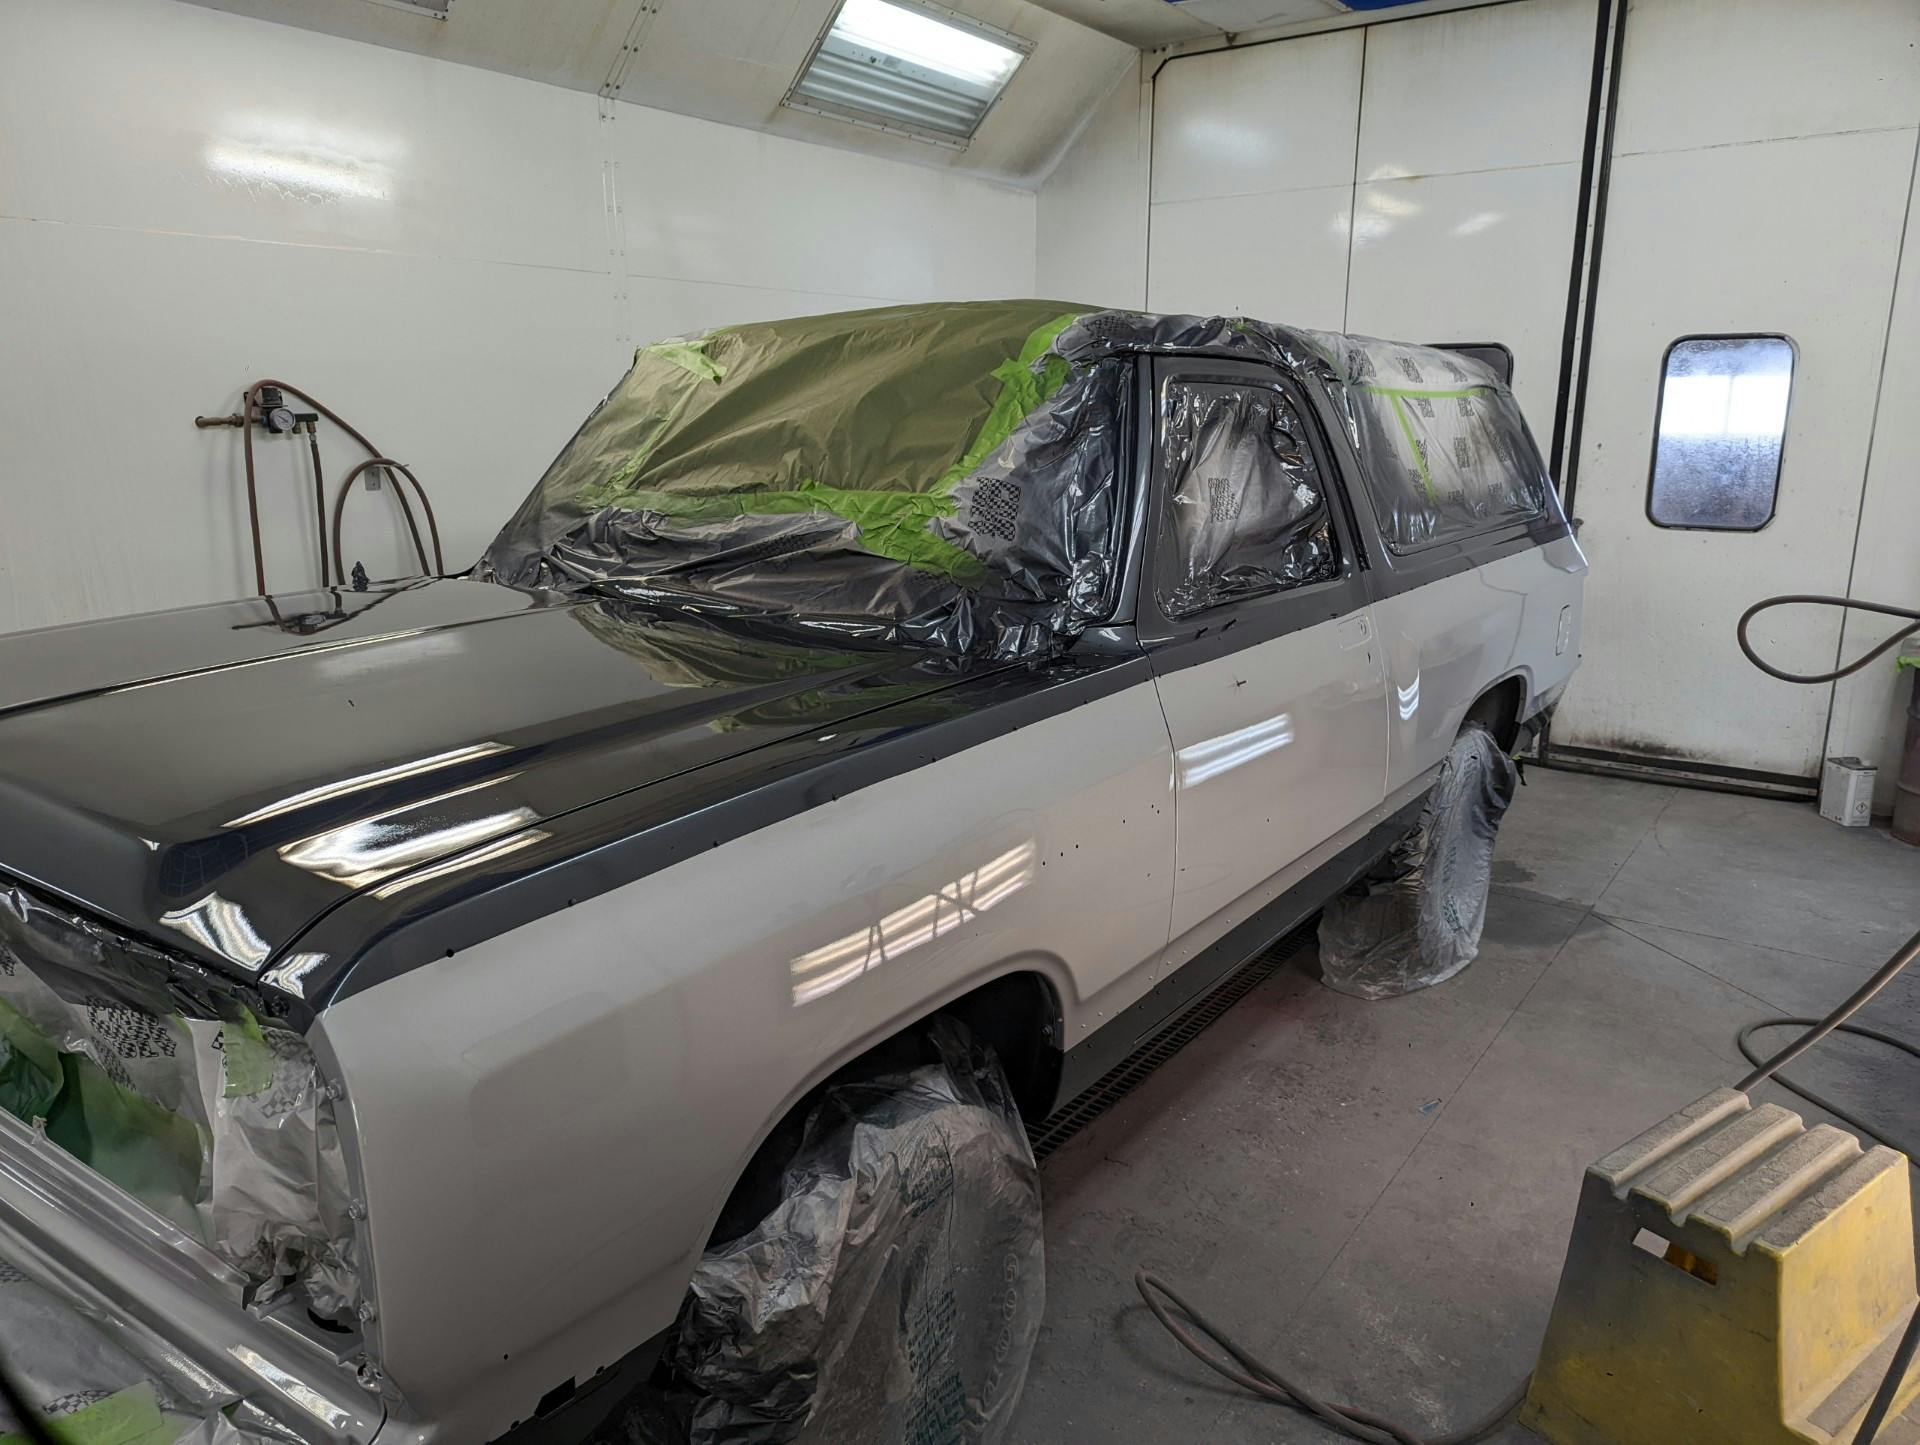 Dodge-Ramcharger-1988-2024-02-19T23:37:08.135Z